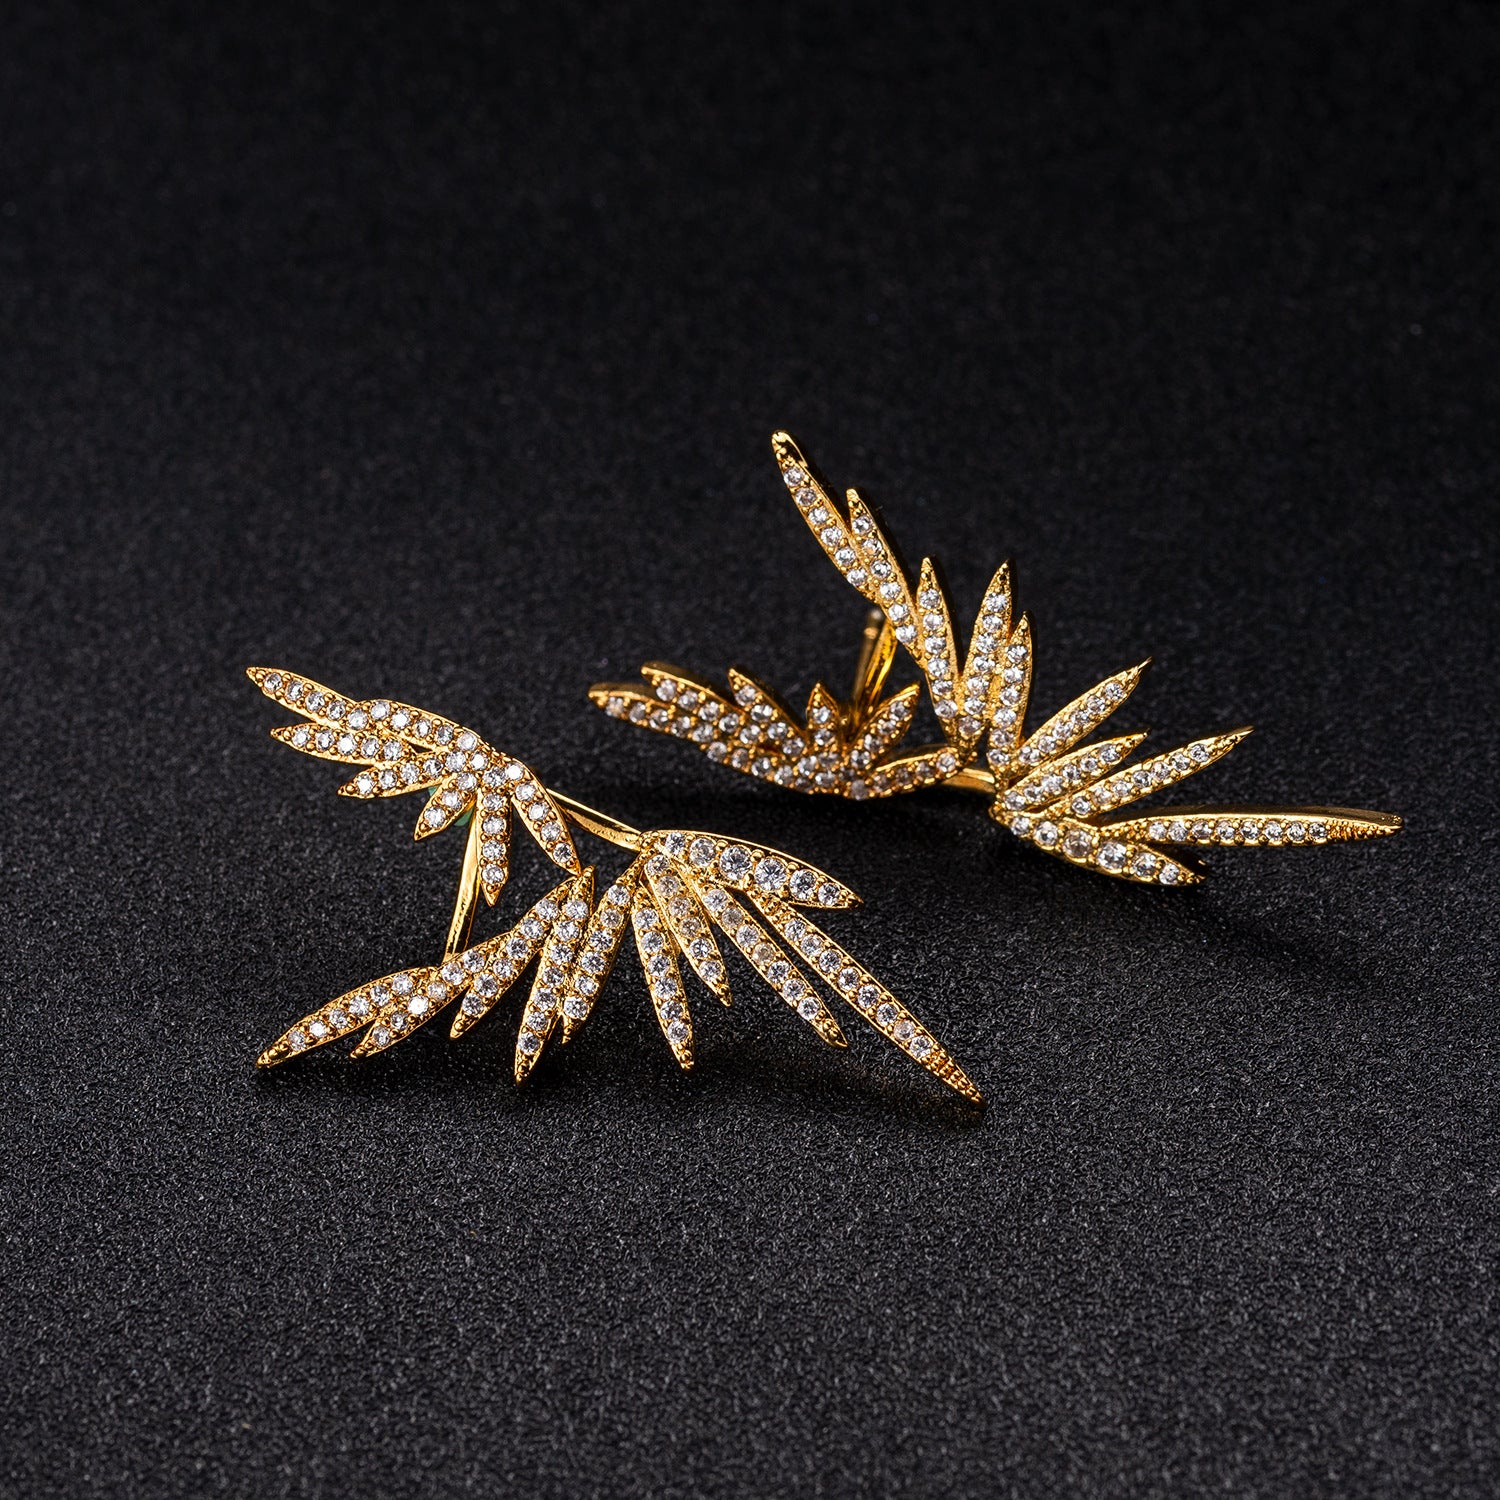 European And American Earrings With Micro-Inlaid Zircon